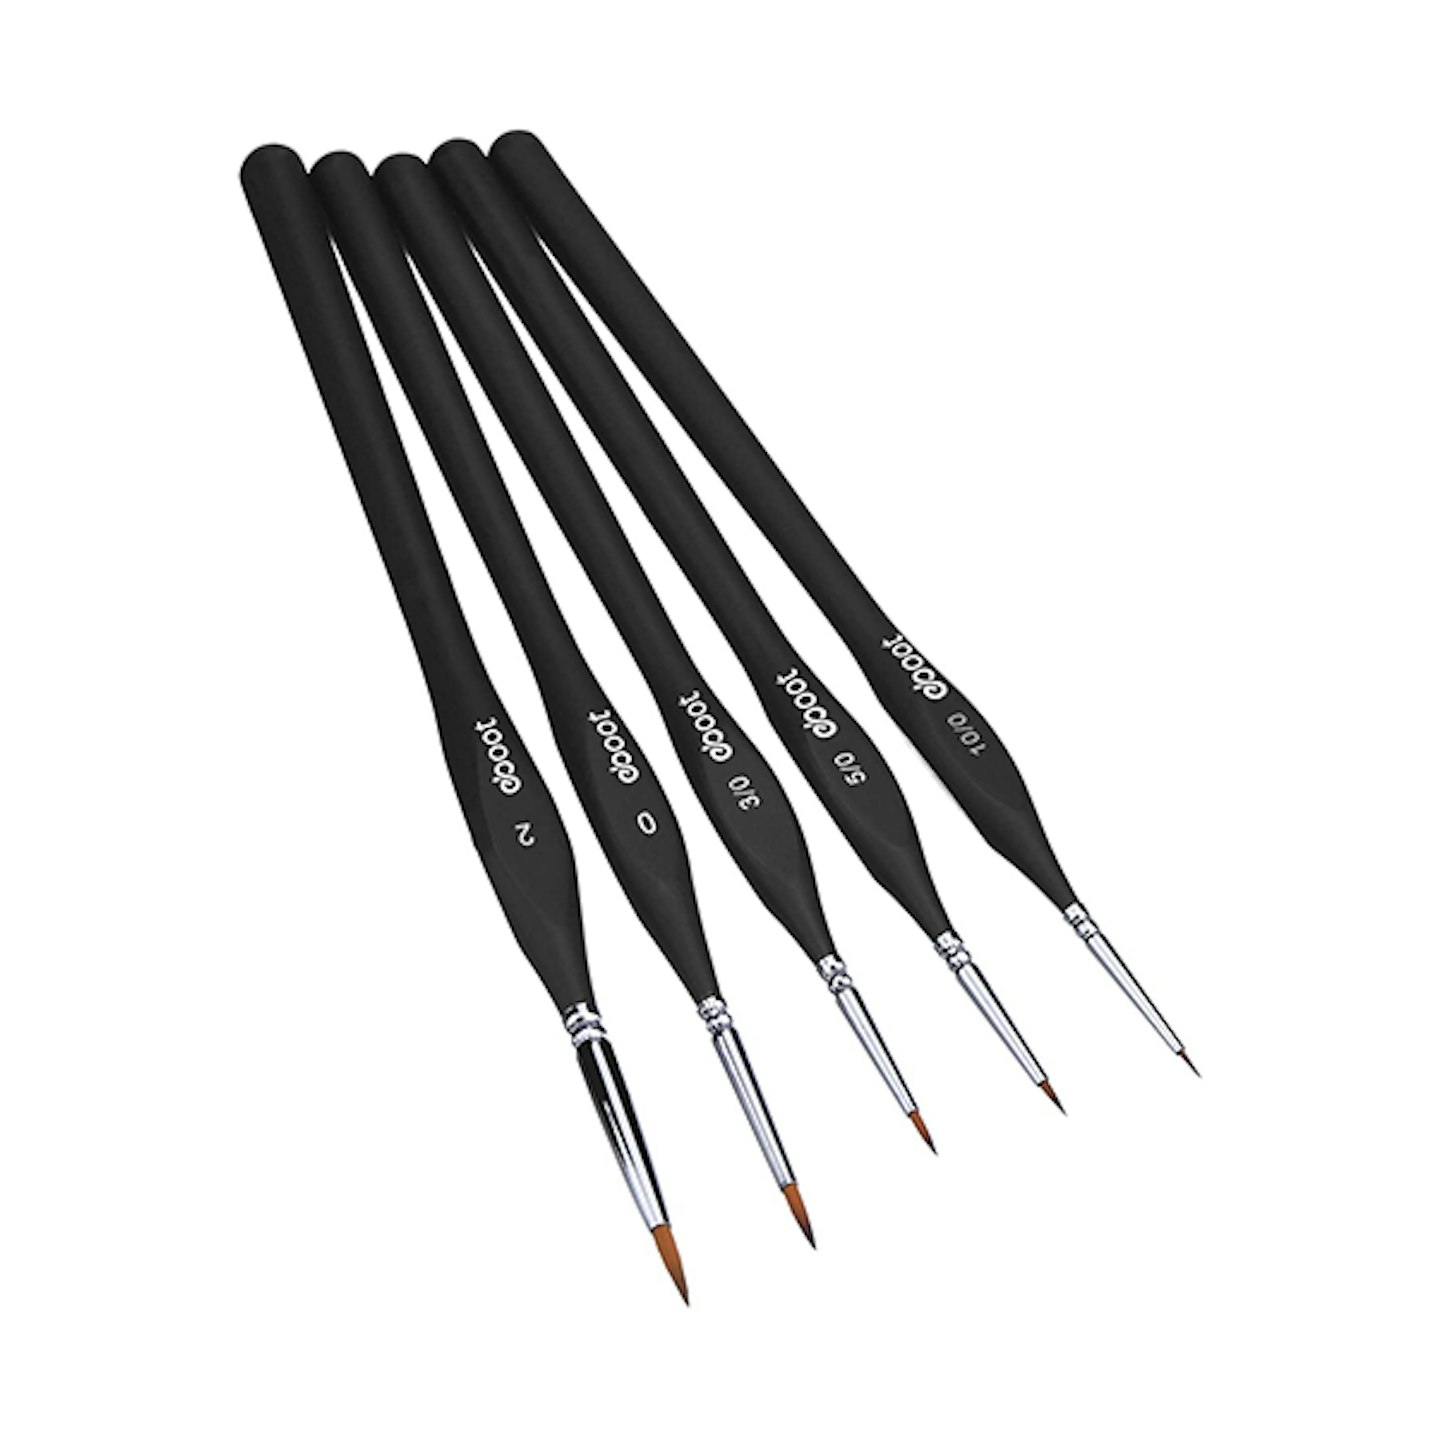 eBoot Paint Brushes Set Artist Paint Brushes Painting Supplies for Art Watercolor Acrylics Oil, 5 Pieces (Black)